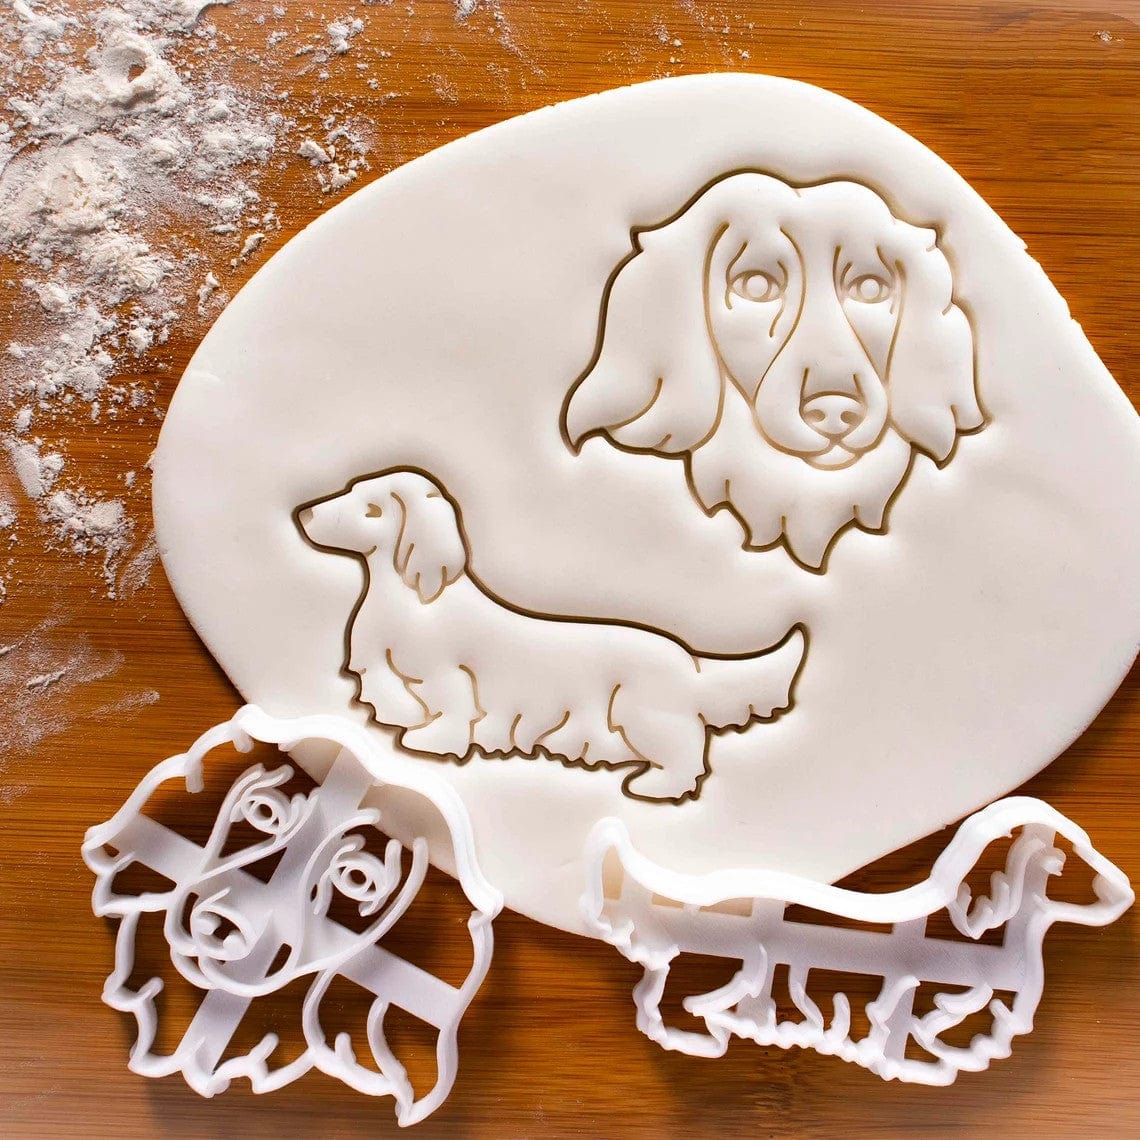 Longhaired Dachshund Cookie Cutter Set Set (Body & Face) The Doxie World